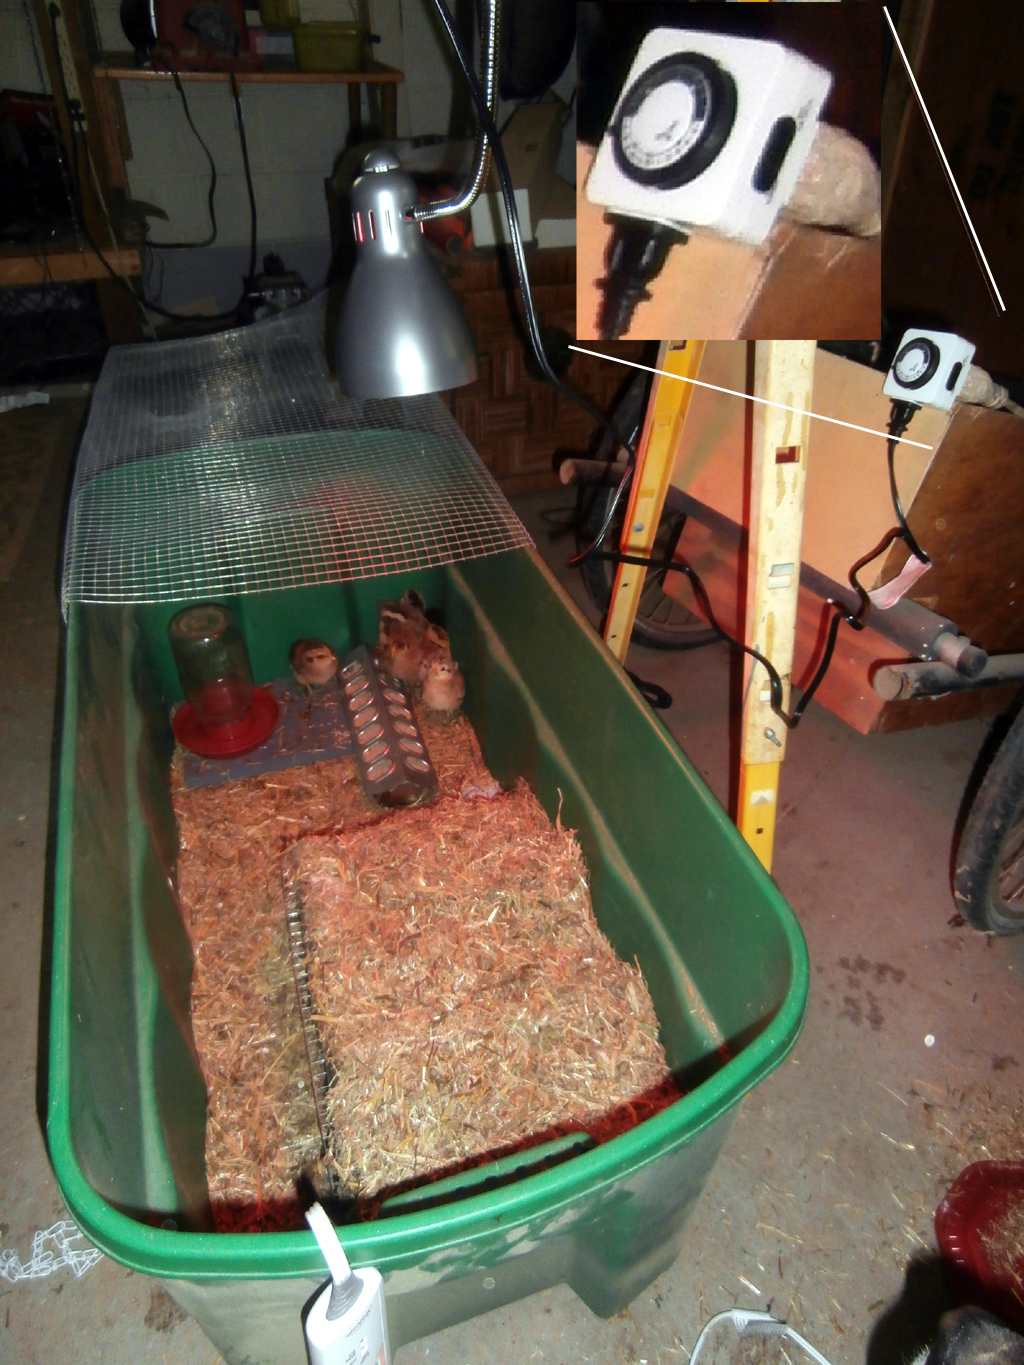 Mama Heating Pad brooder bin. The light is an LED and is timer controlled to give a day/night cycle.